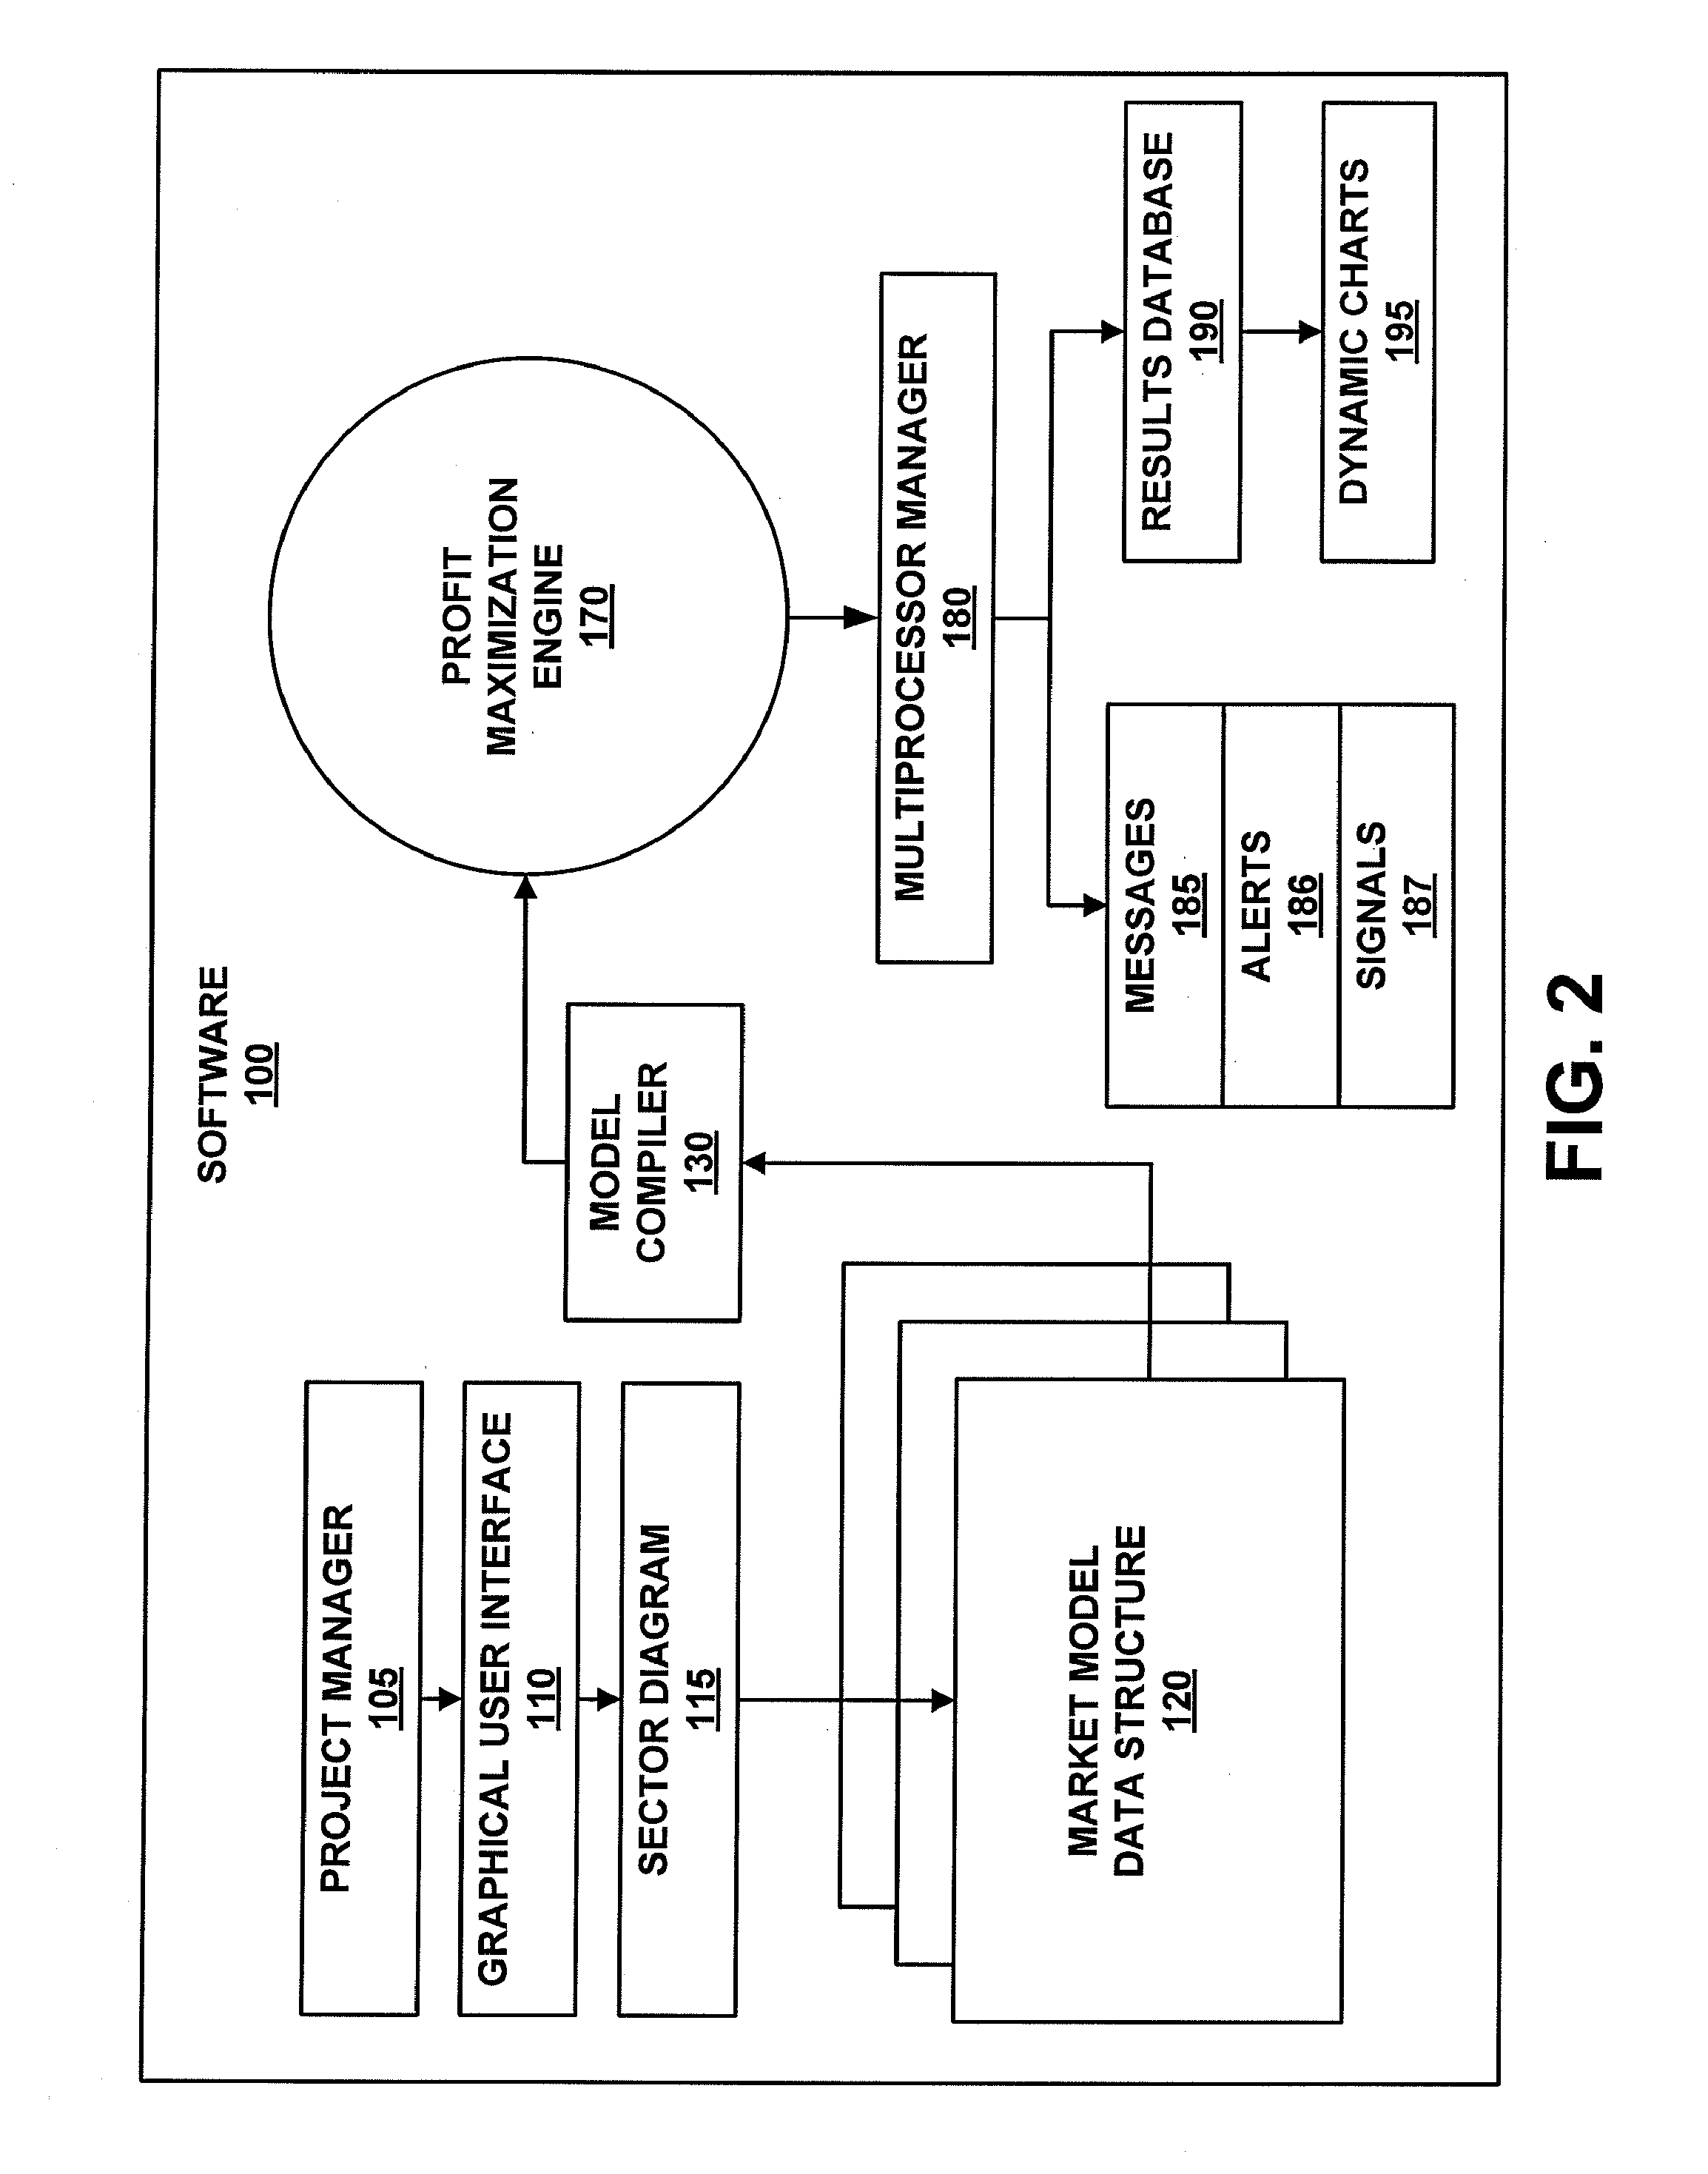 System and method for visually building a market simulation